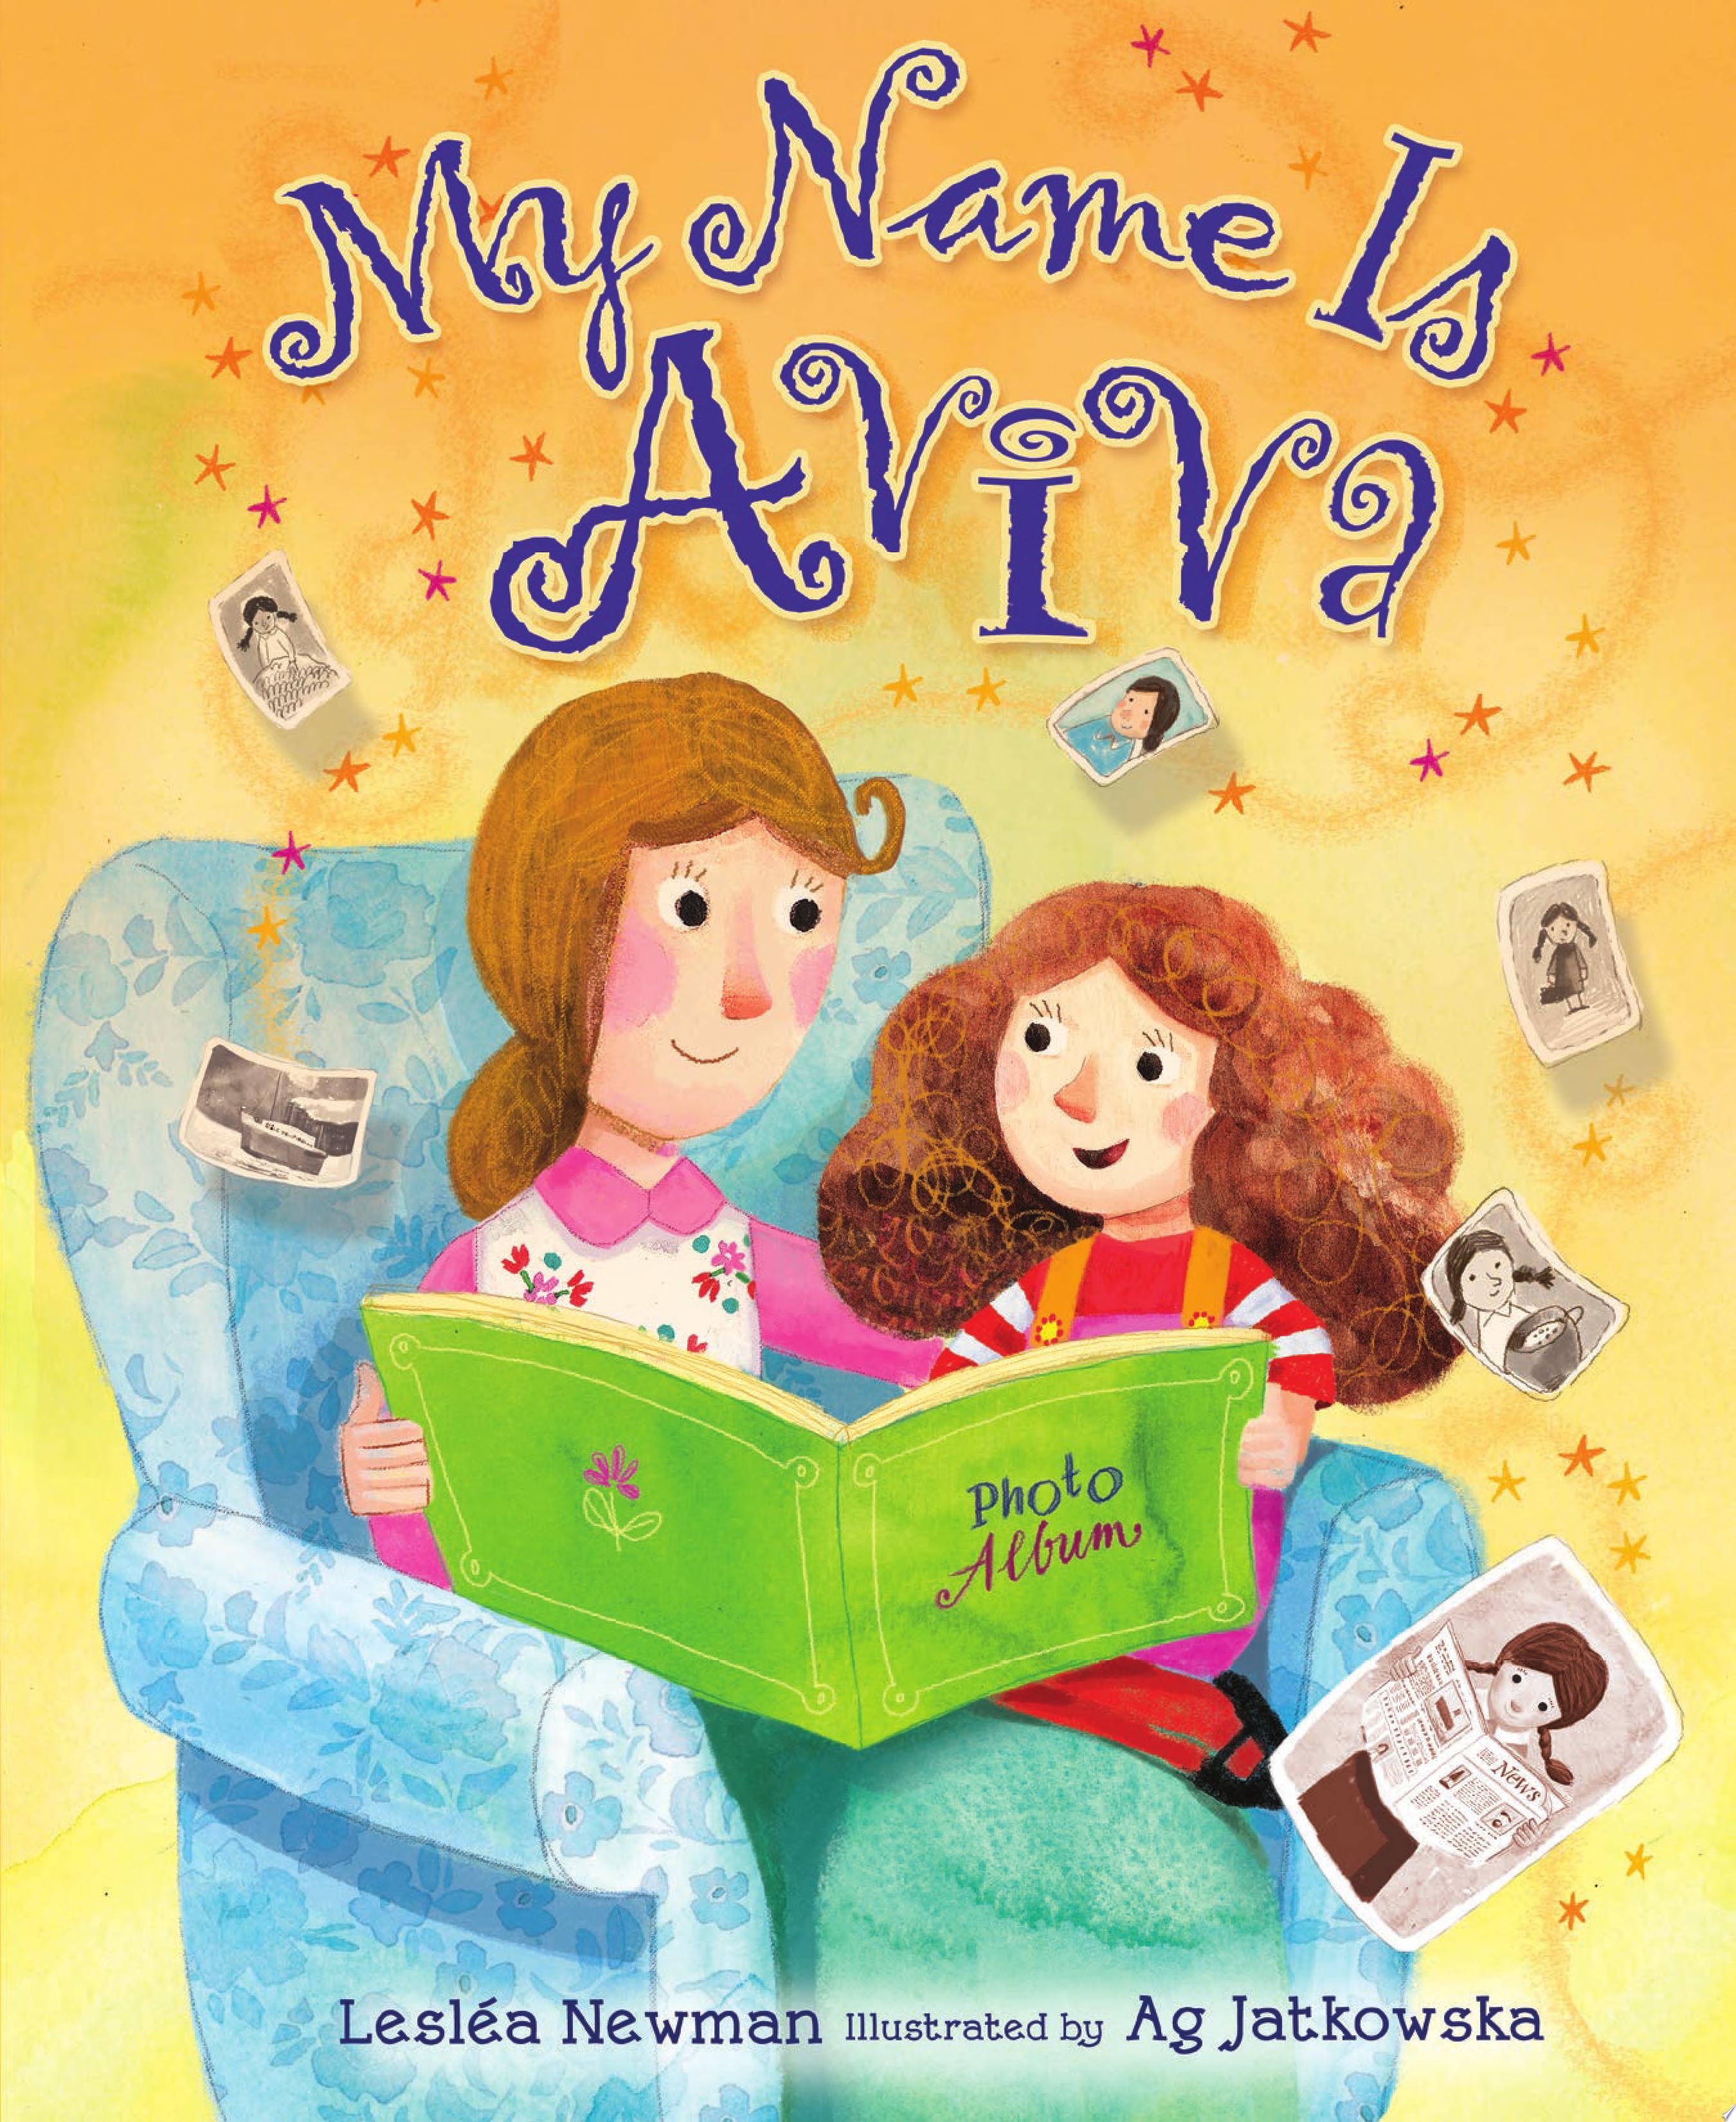 Image for "My Name Is Aviva"